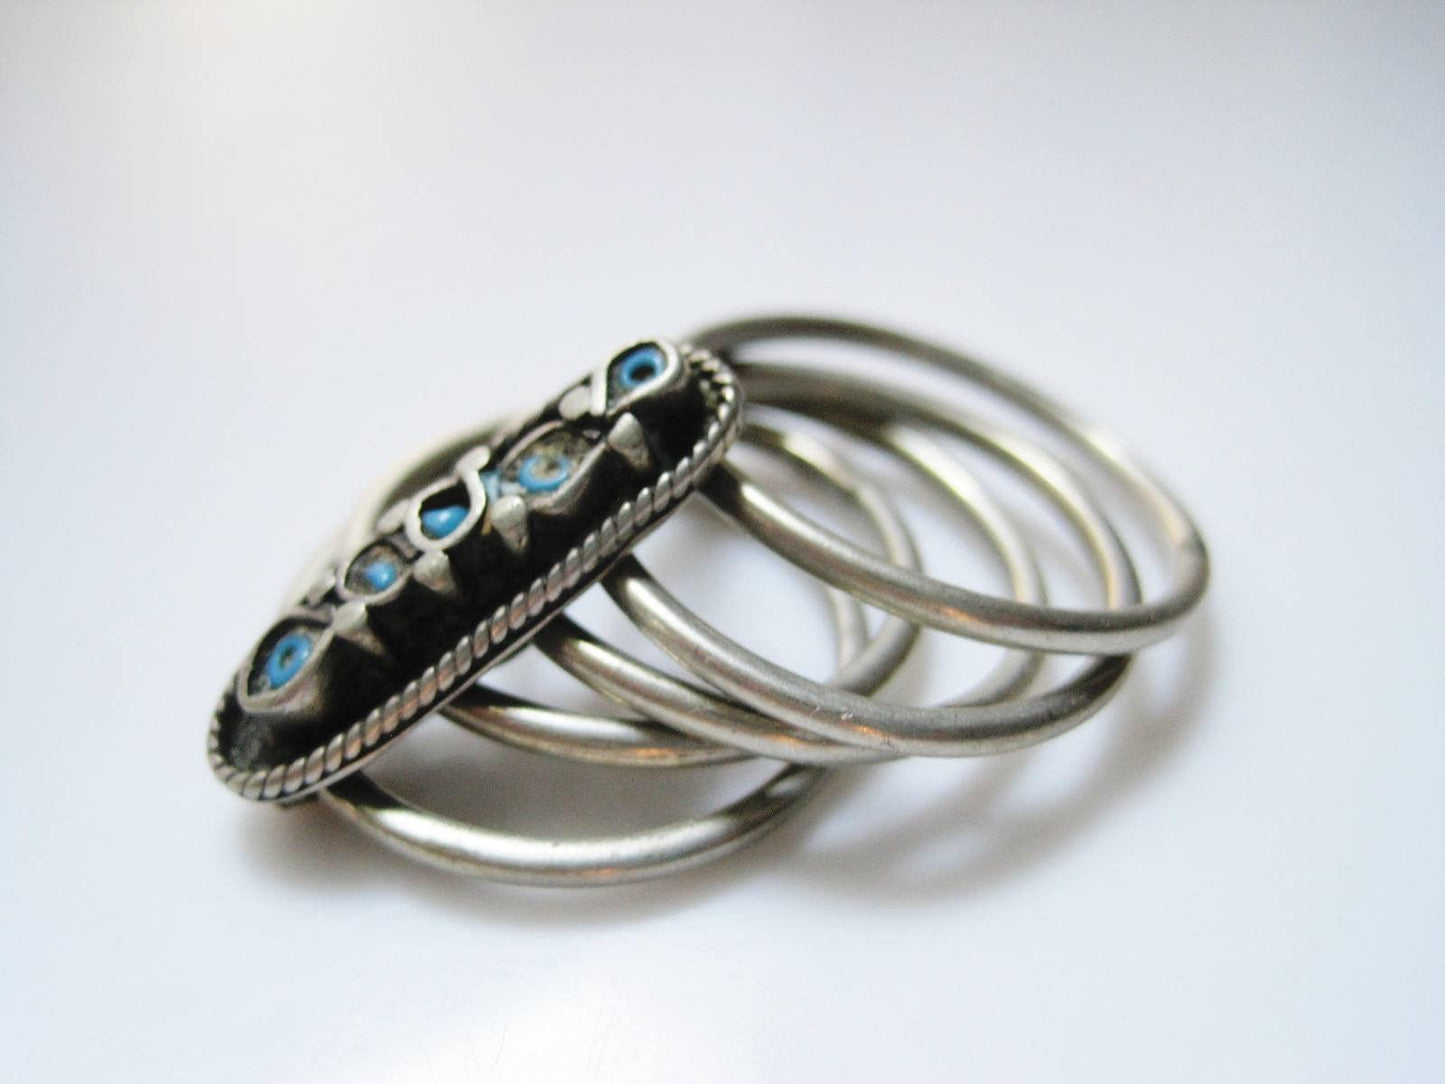 Vintage Middle East Ring with Five Bands and Turquoise Beads - Anteeka